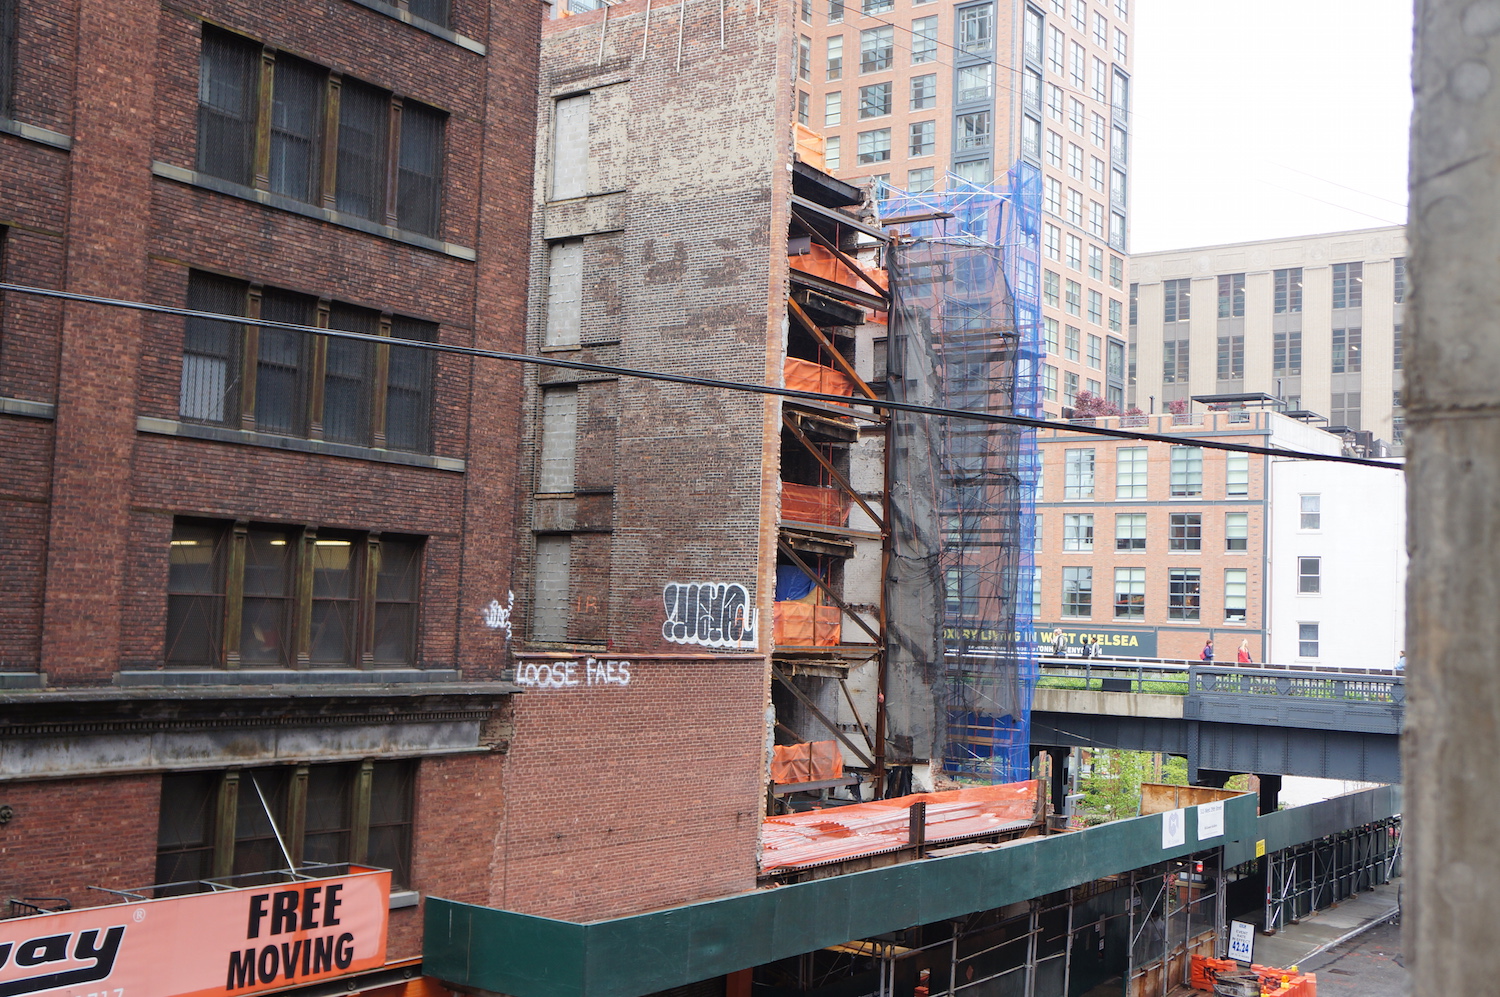 The current state of 515 West 29th Street, Chan's other condo building across the street